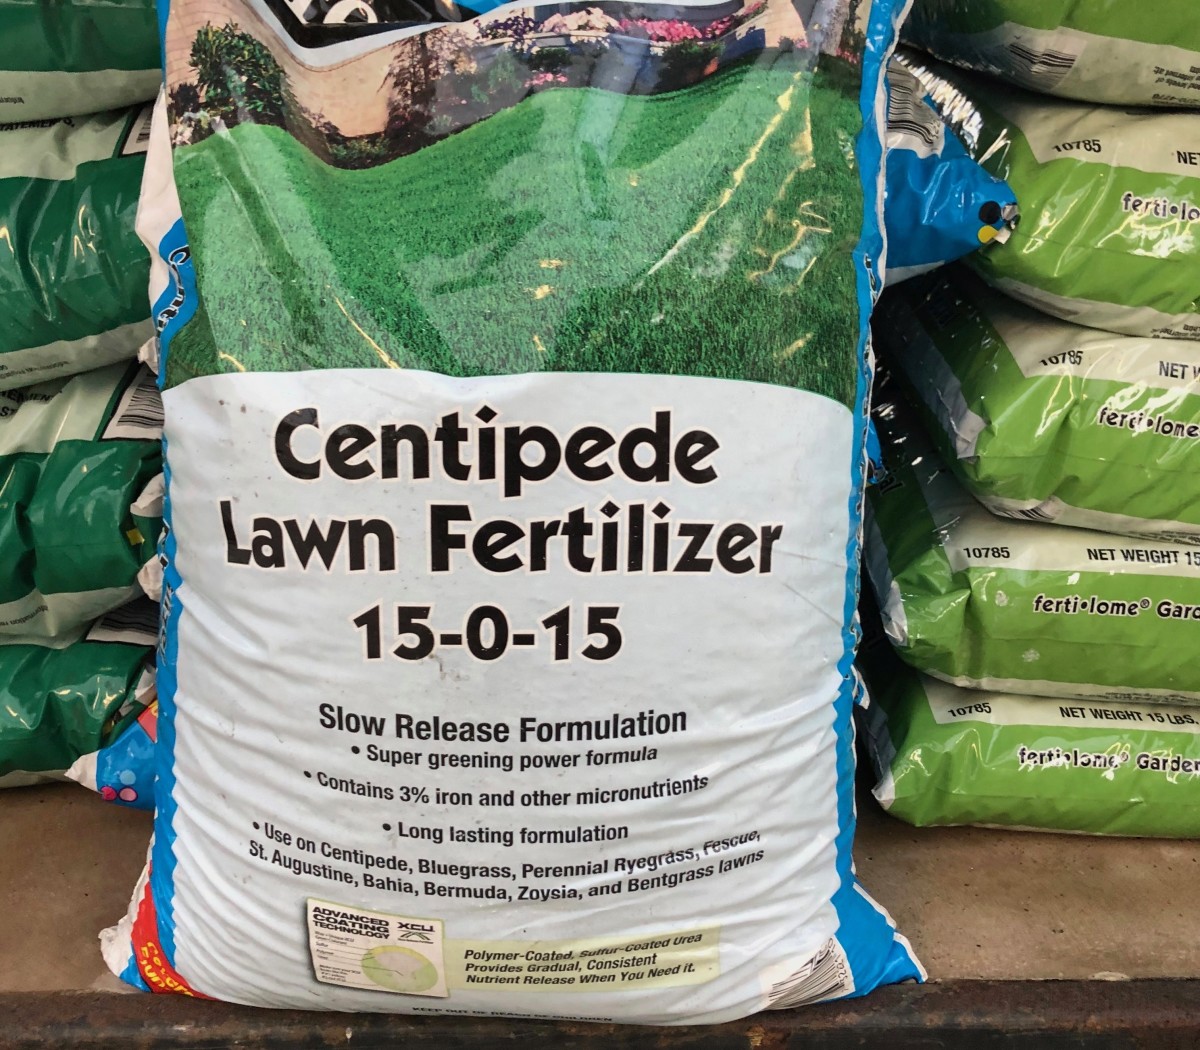 Organic vs. Chemical Fertilizers, and Those 3 Little Numbers